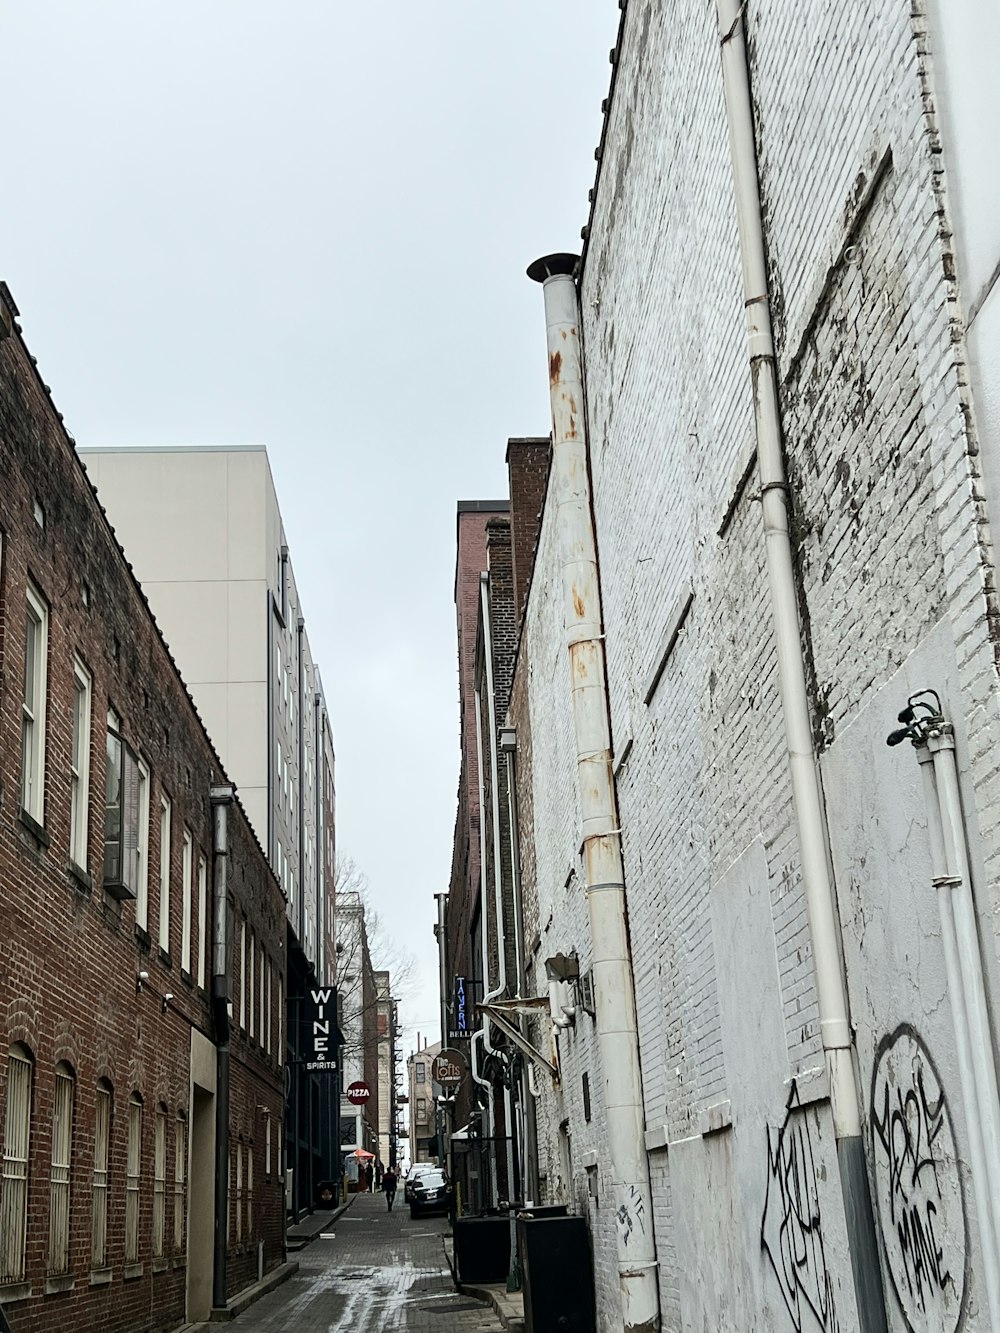 a narrow street with graffiti on the side of buildings